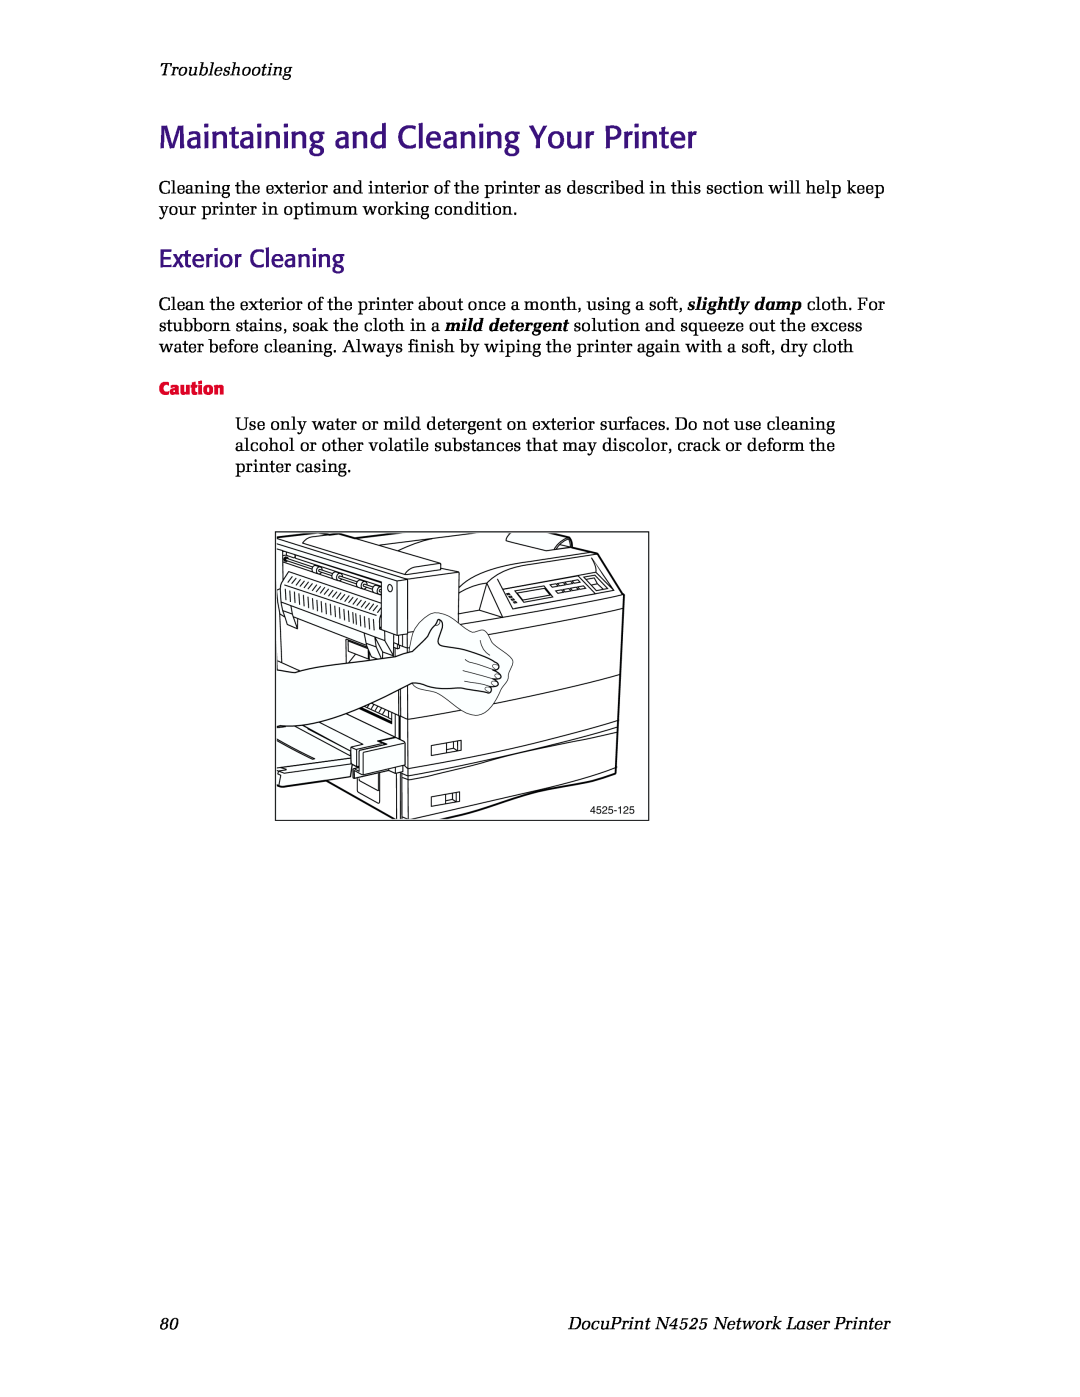 Xerox N4525 manual Maintaining and Cleaning Your Printer, Exterior Cleaning, Troubleshooting 